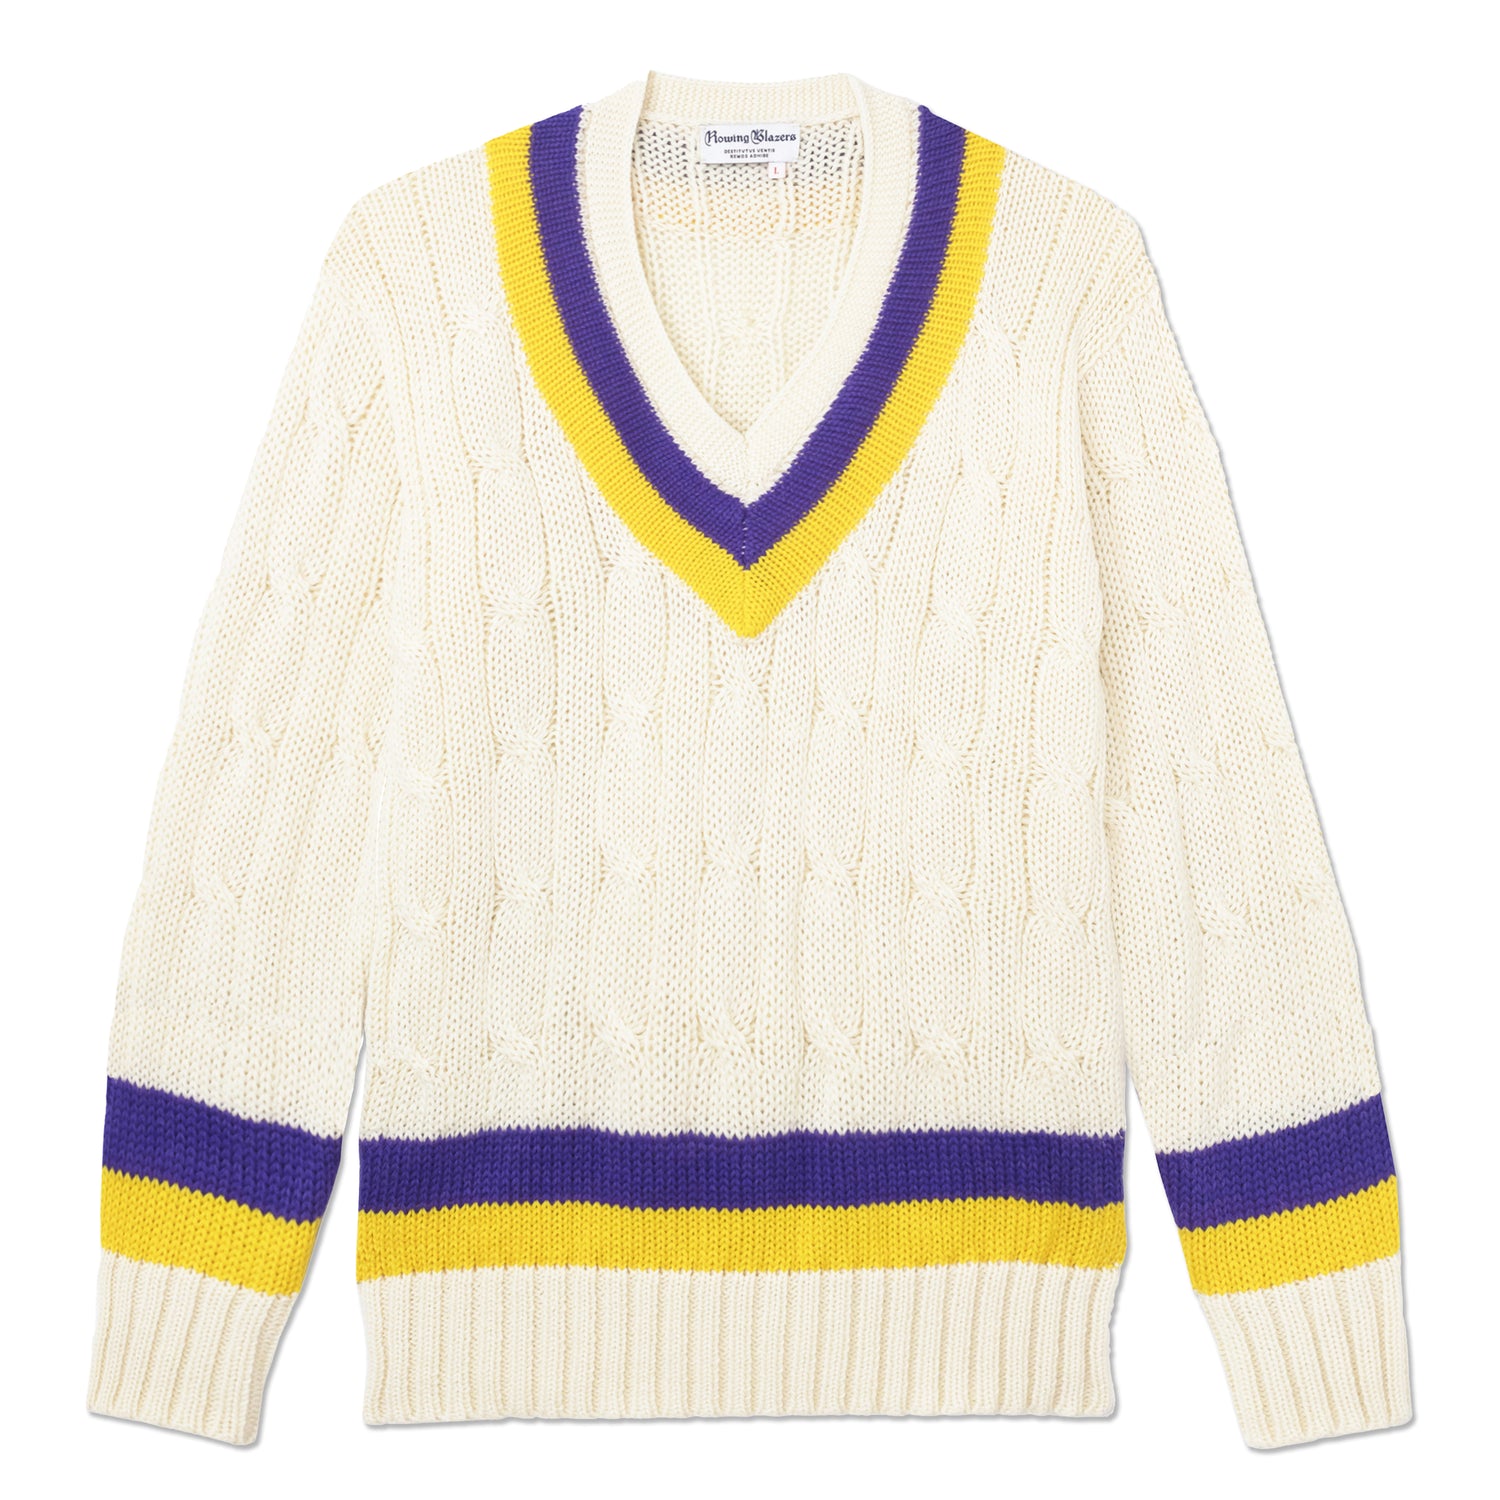 Cable knit cream cricket sweater with purple and yellow stripes around the collar, sleeves, and waist.